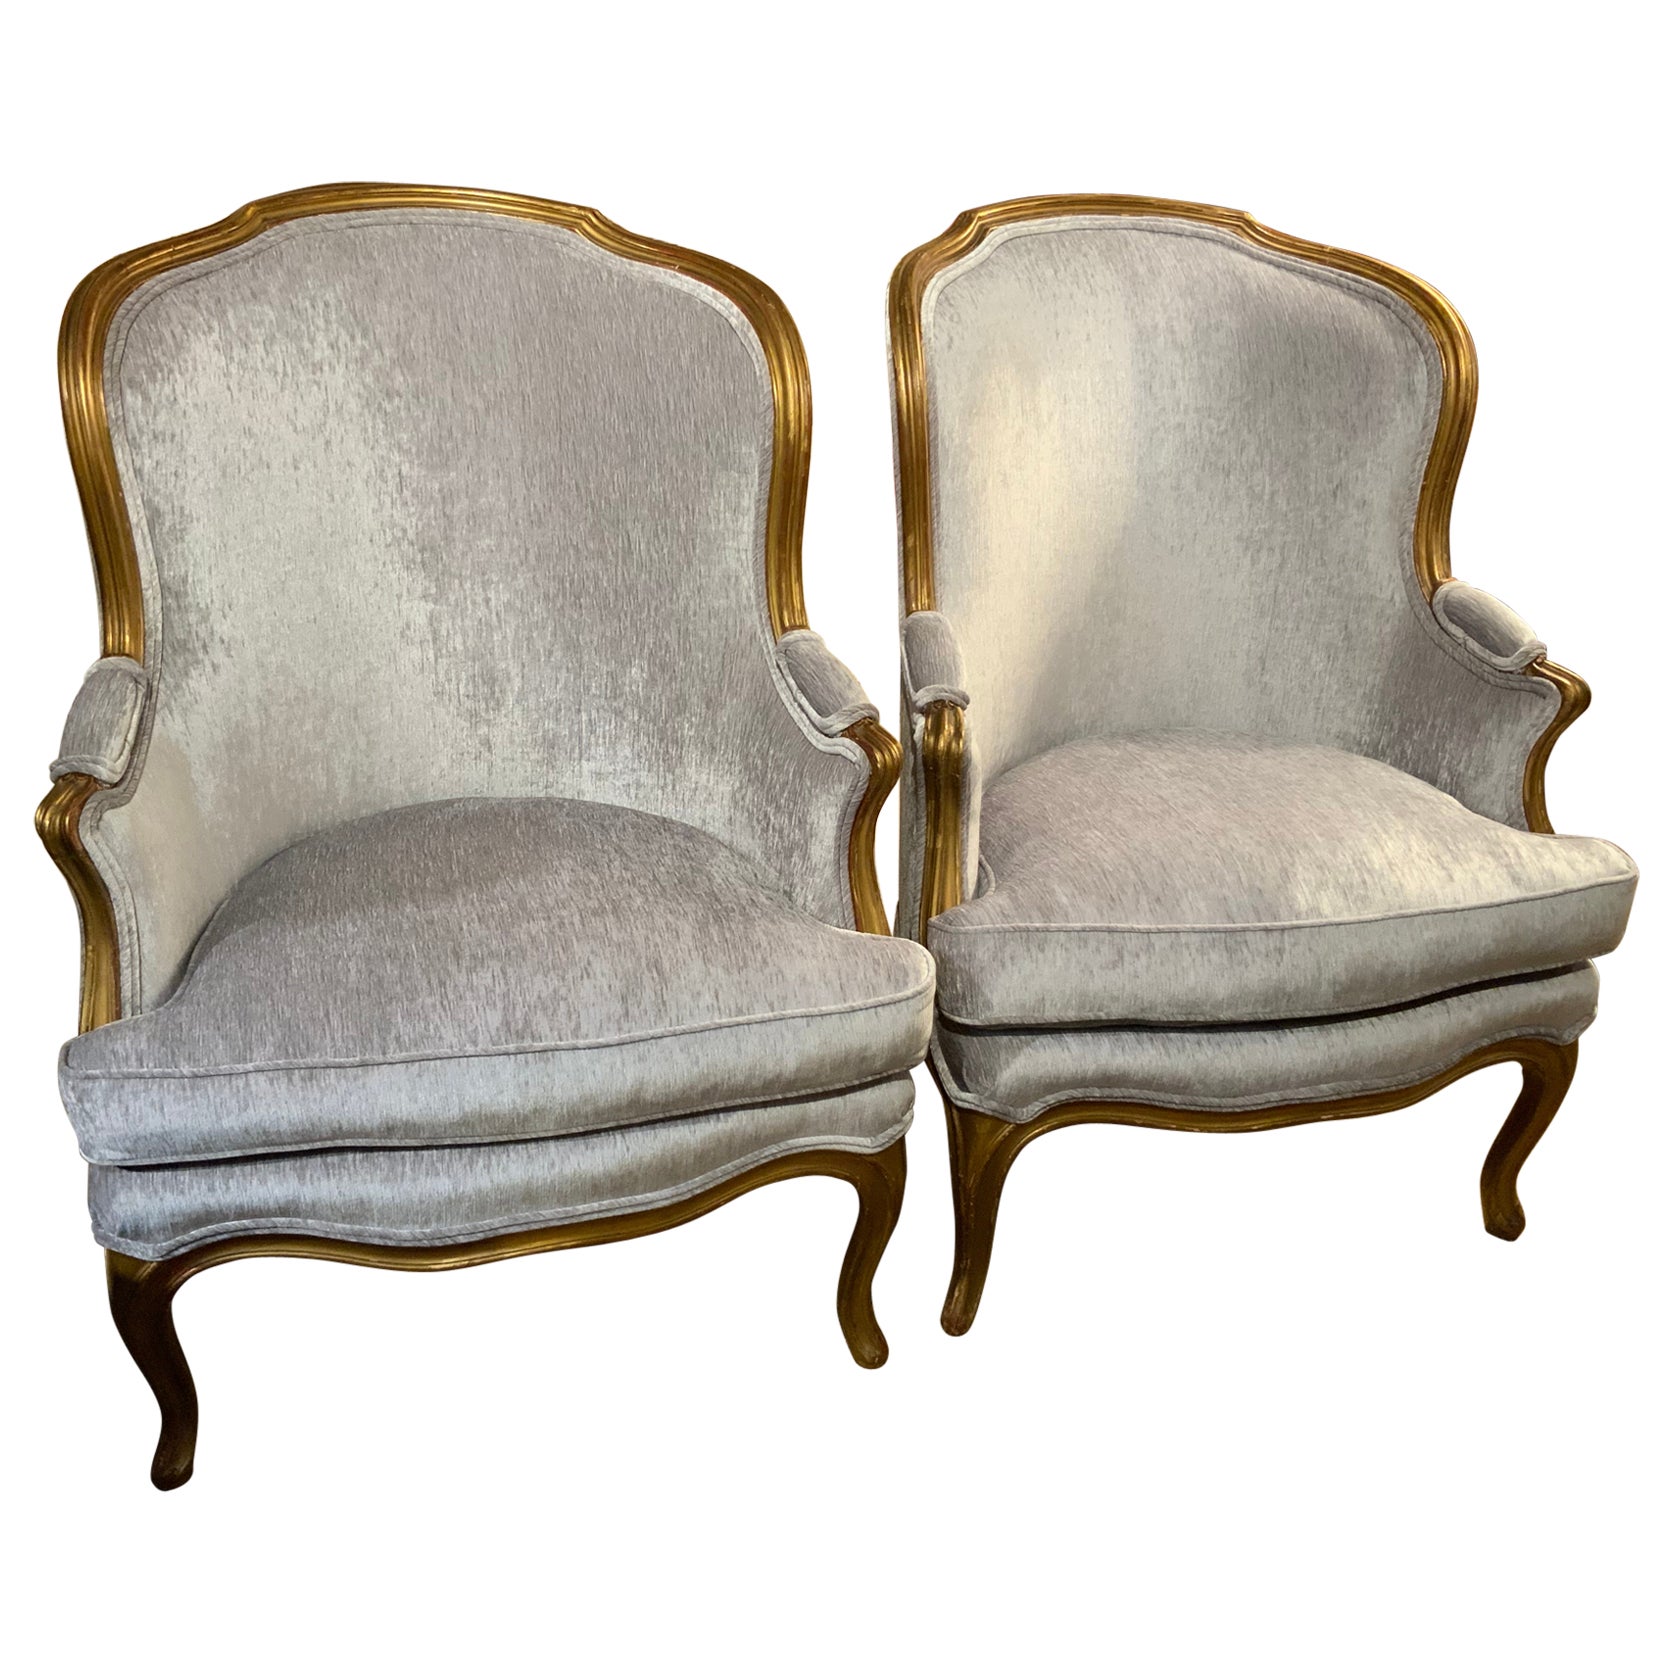 Pair of French Antique Giltwood Louis XVI-Style Bergere Chairs/Arm Chairs 19th C For Sale